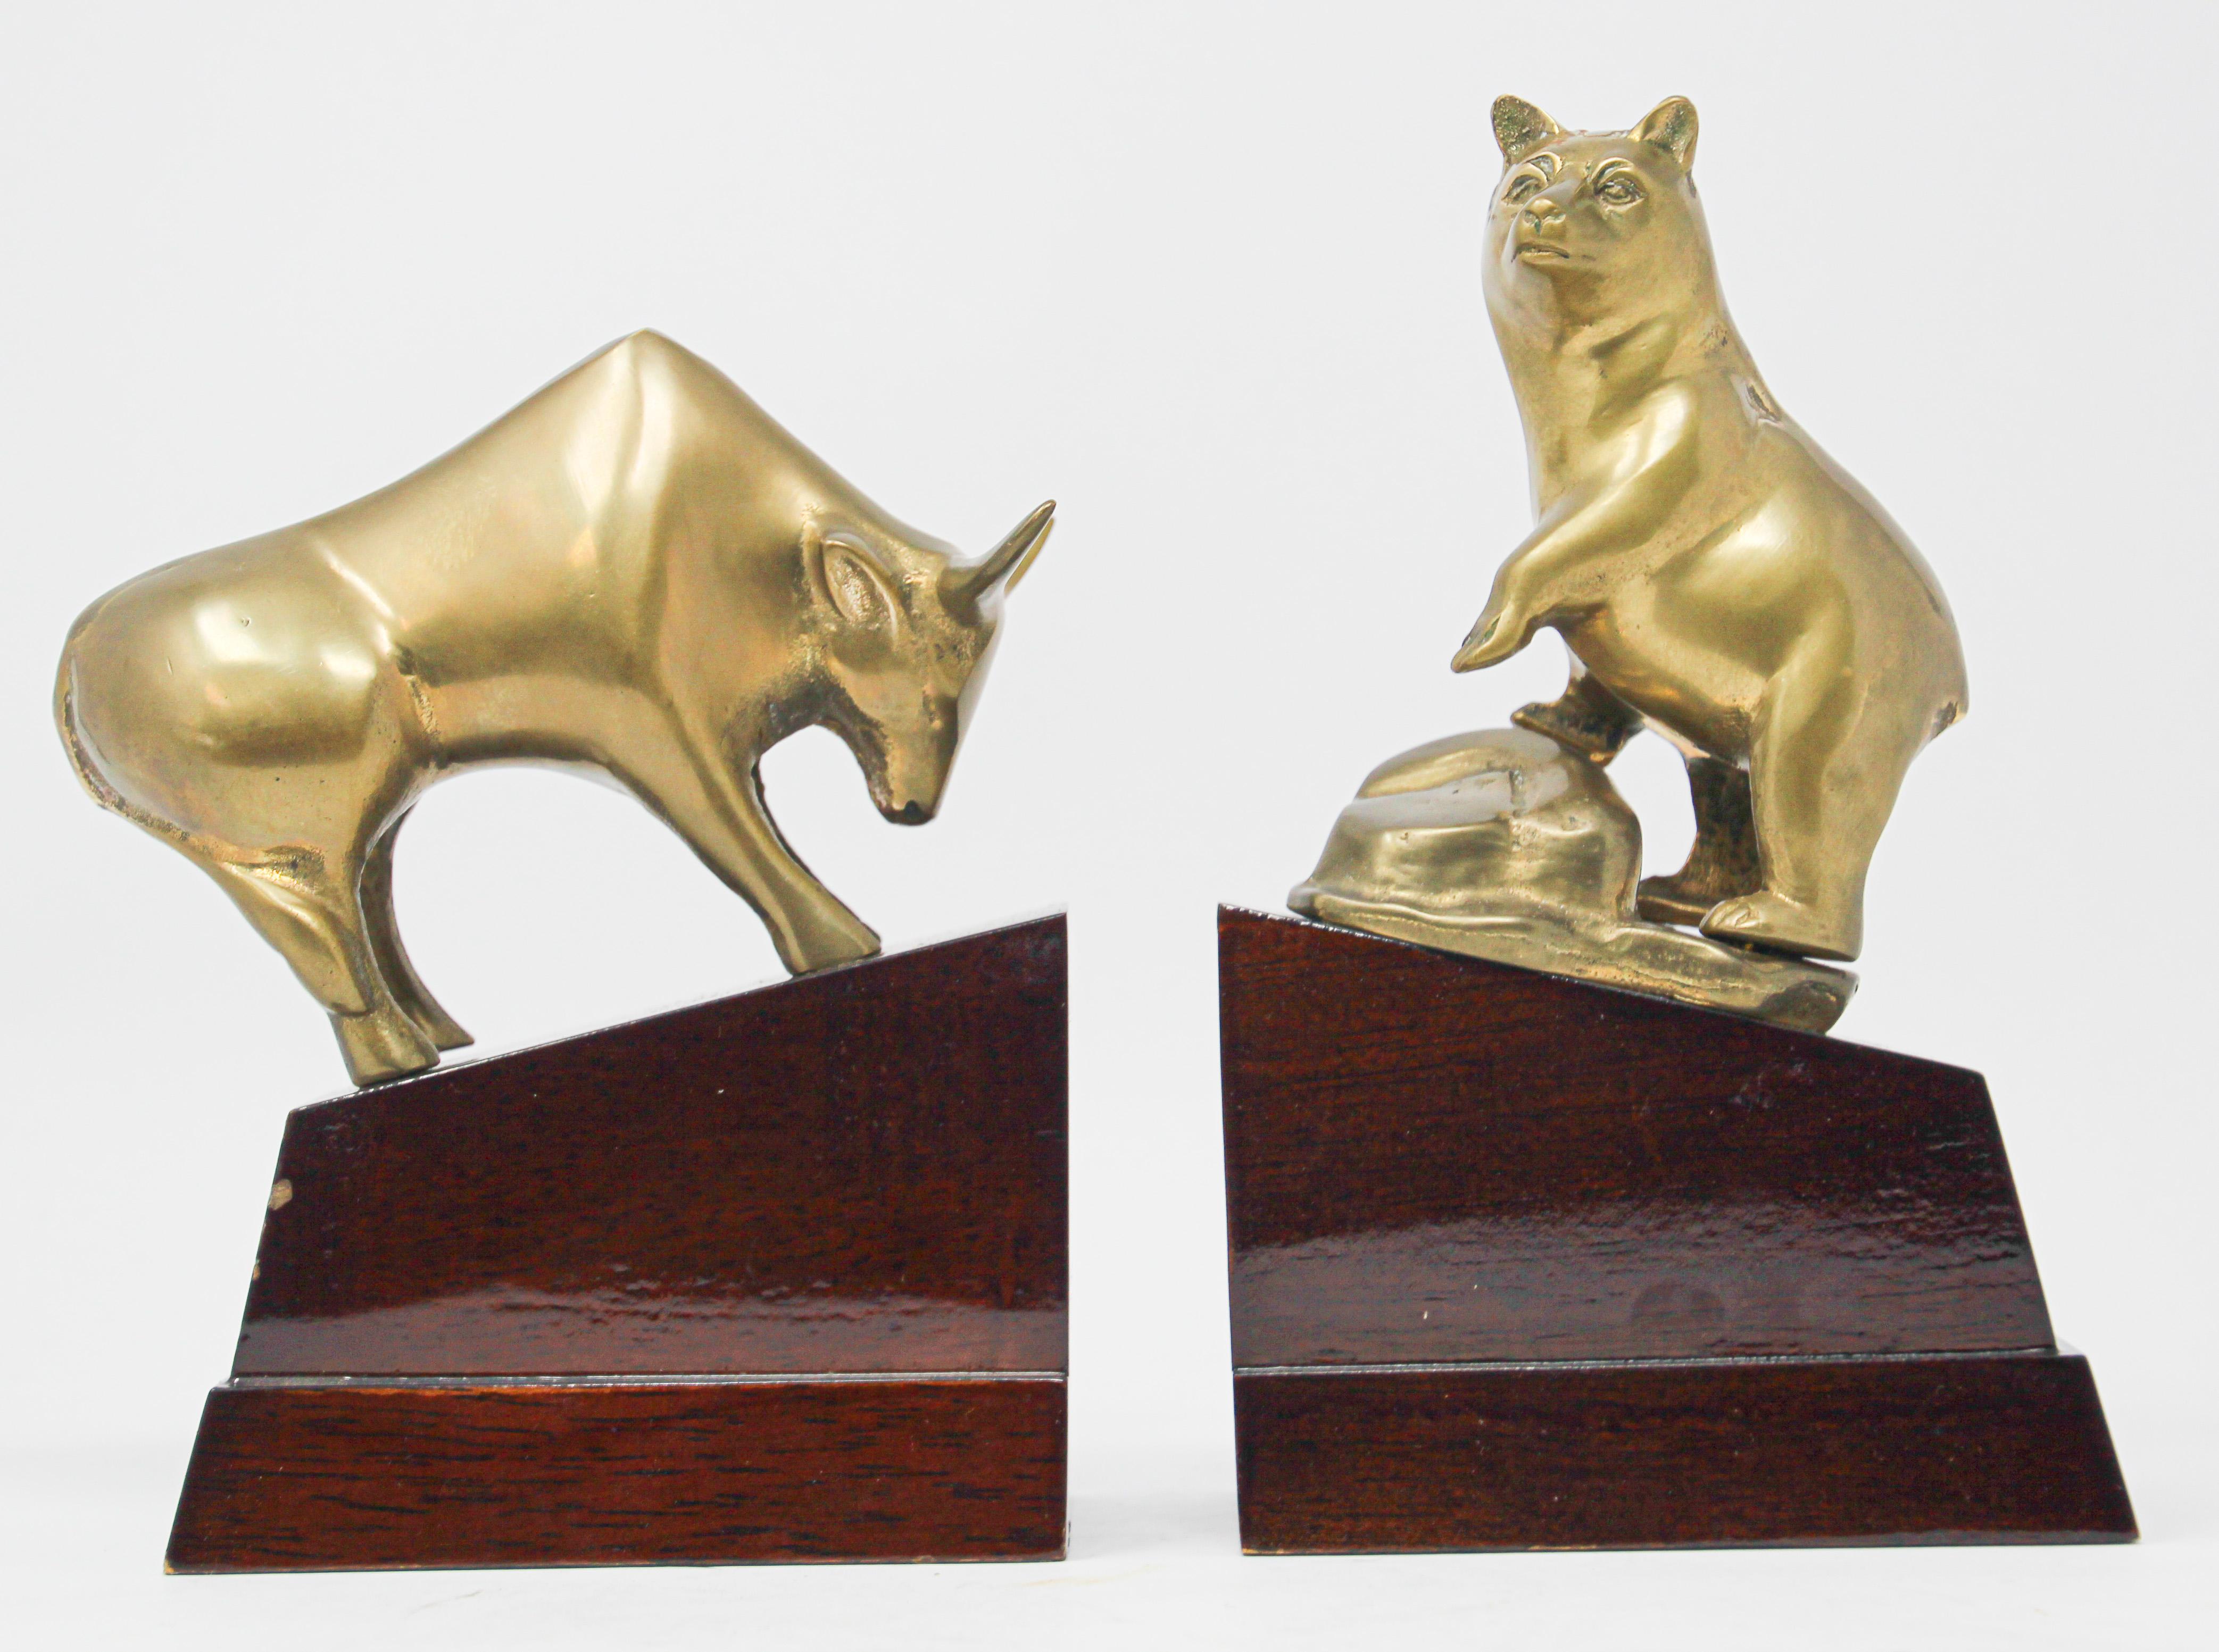 Art Deco style brass bull and bear bookends.
Great on any desk the polished brass bull and bear on wood stands bookends or paperweights.
Great decorative metal brass book ends.
Wall Street bull and bear broker decorative desk decoration.
Great